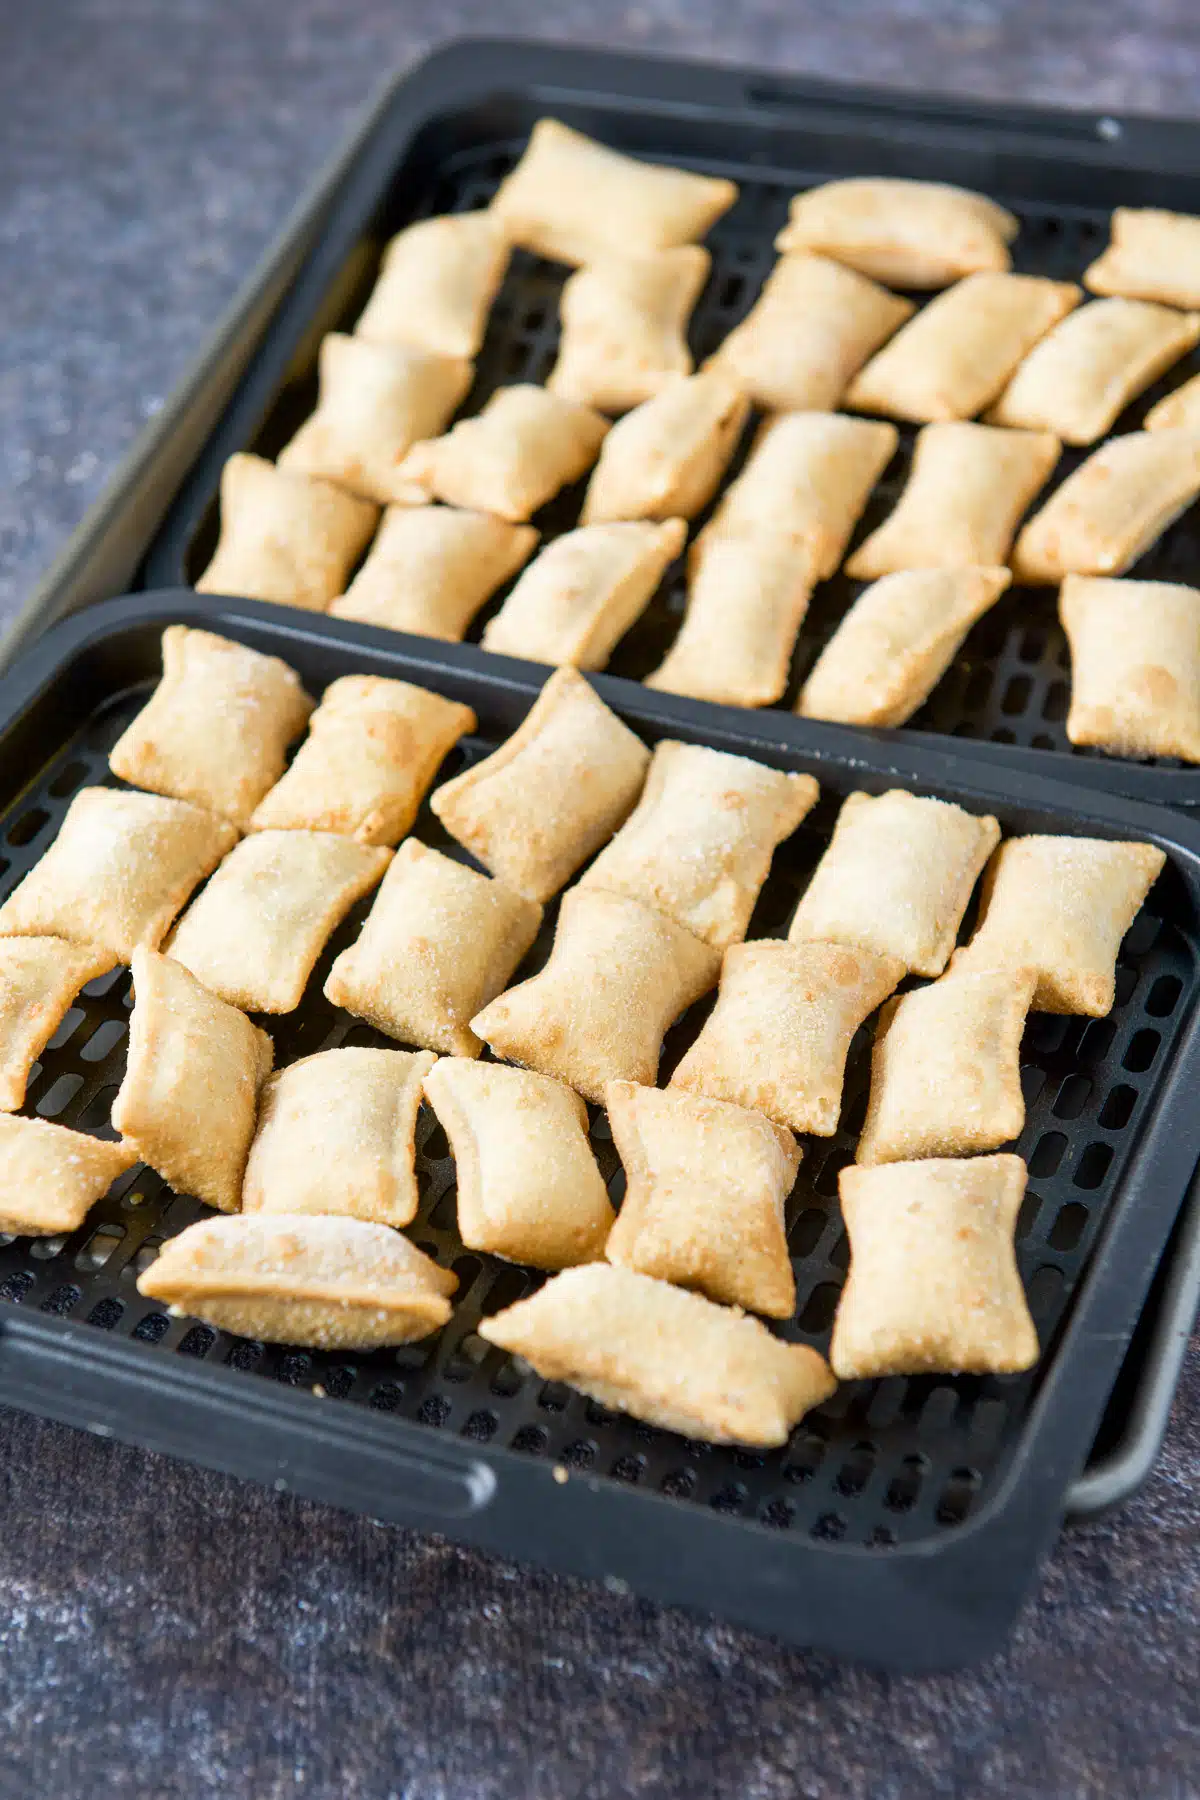 Two air fryer trays covered with frozen pizza rolls